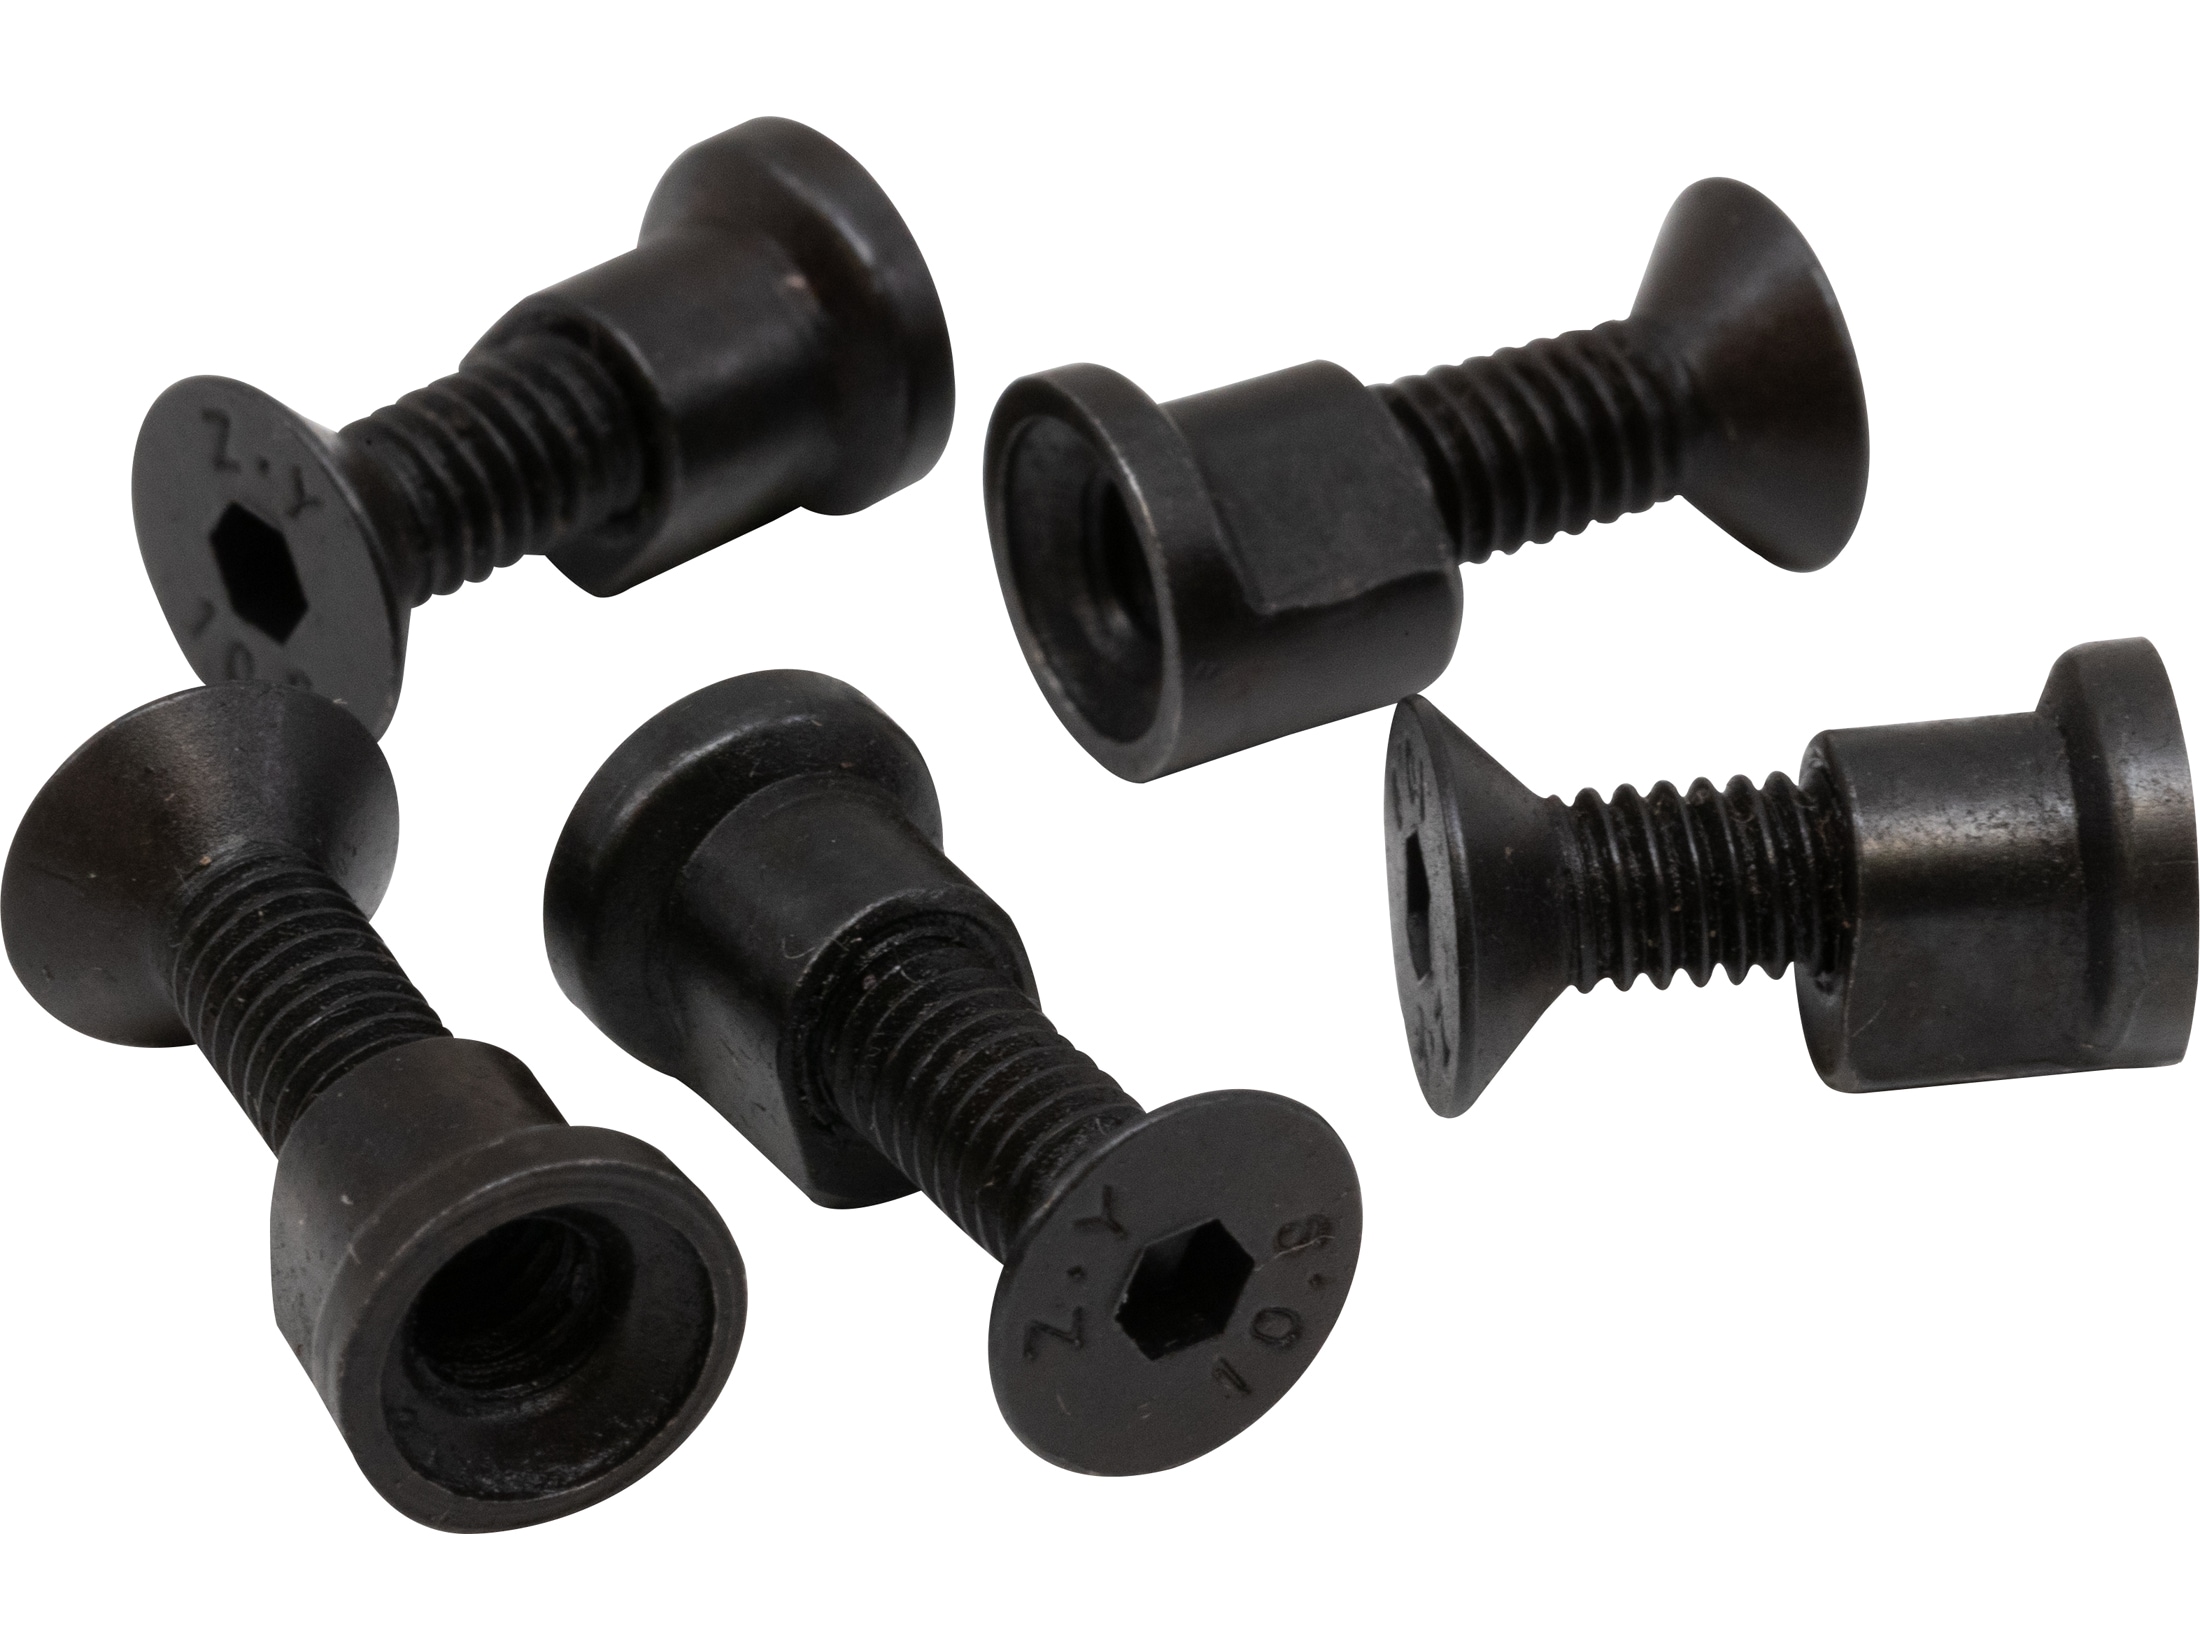 12PC Mounting Screw Nut Replacement Set for KeyMod Rail Section 